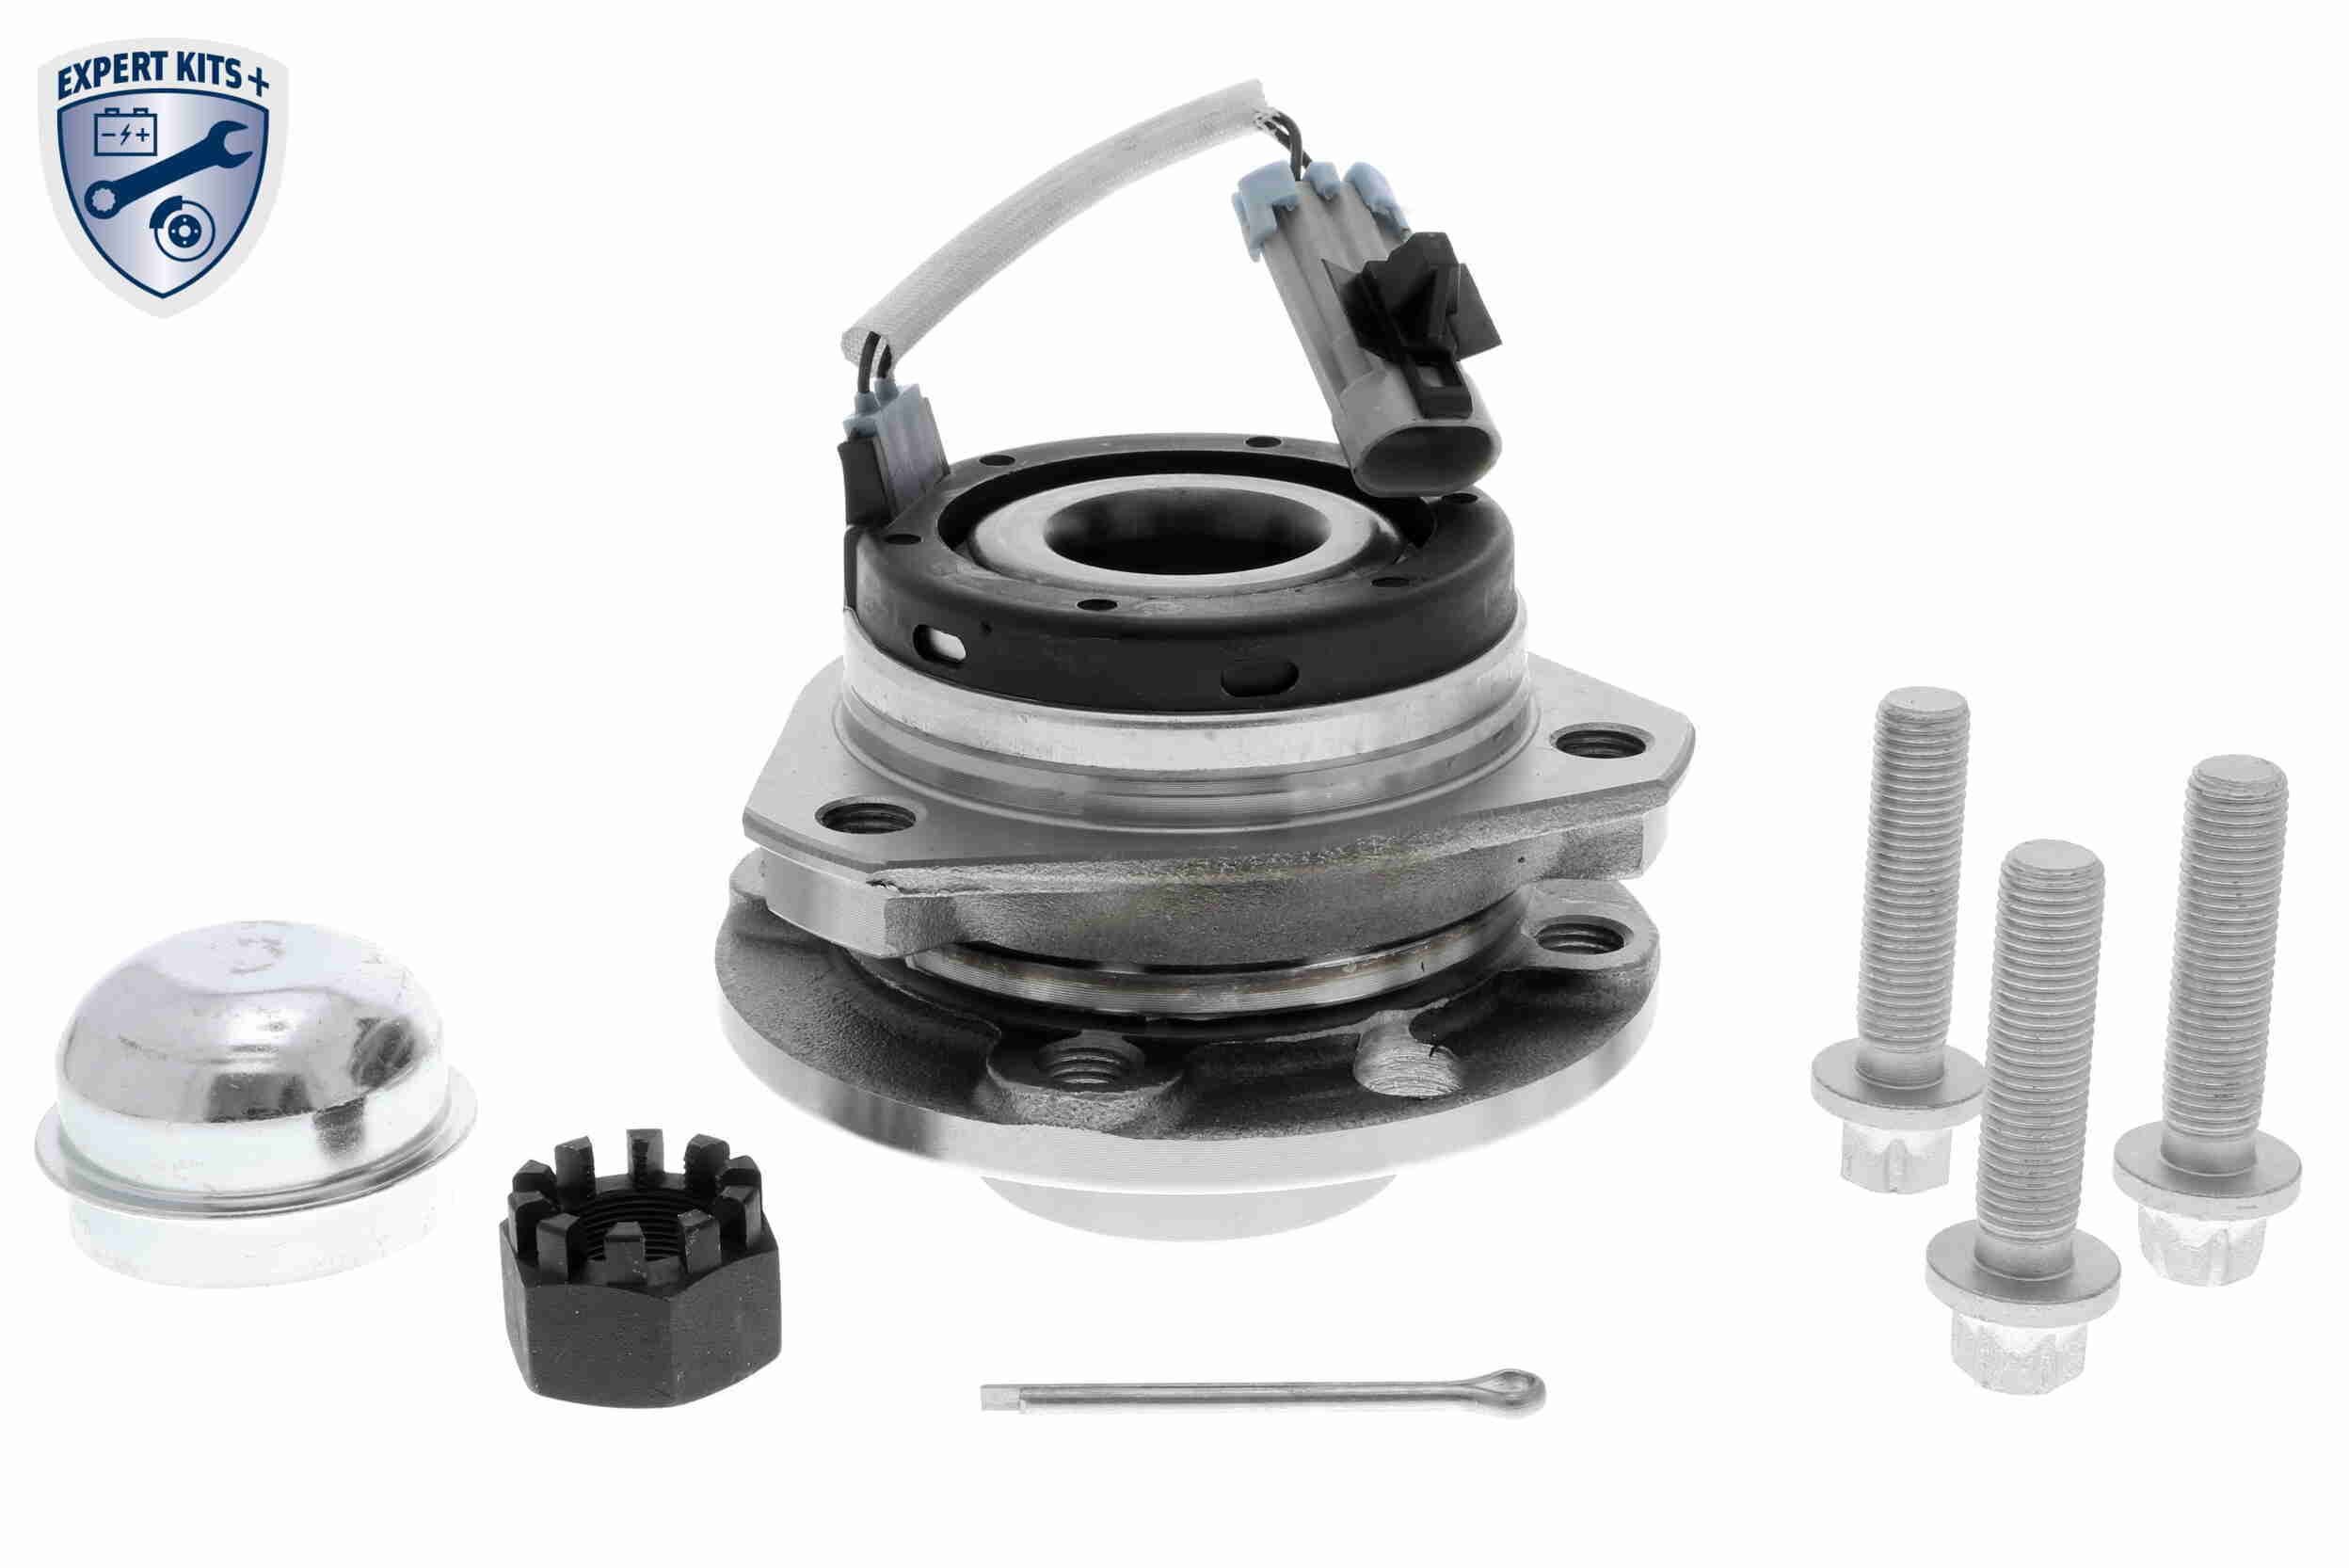 VAICO V40-7004 Wheel bearing kit Front Axle, EXPERT KITS +, with integrated magnetic sensor ring, 119 mm